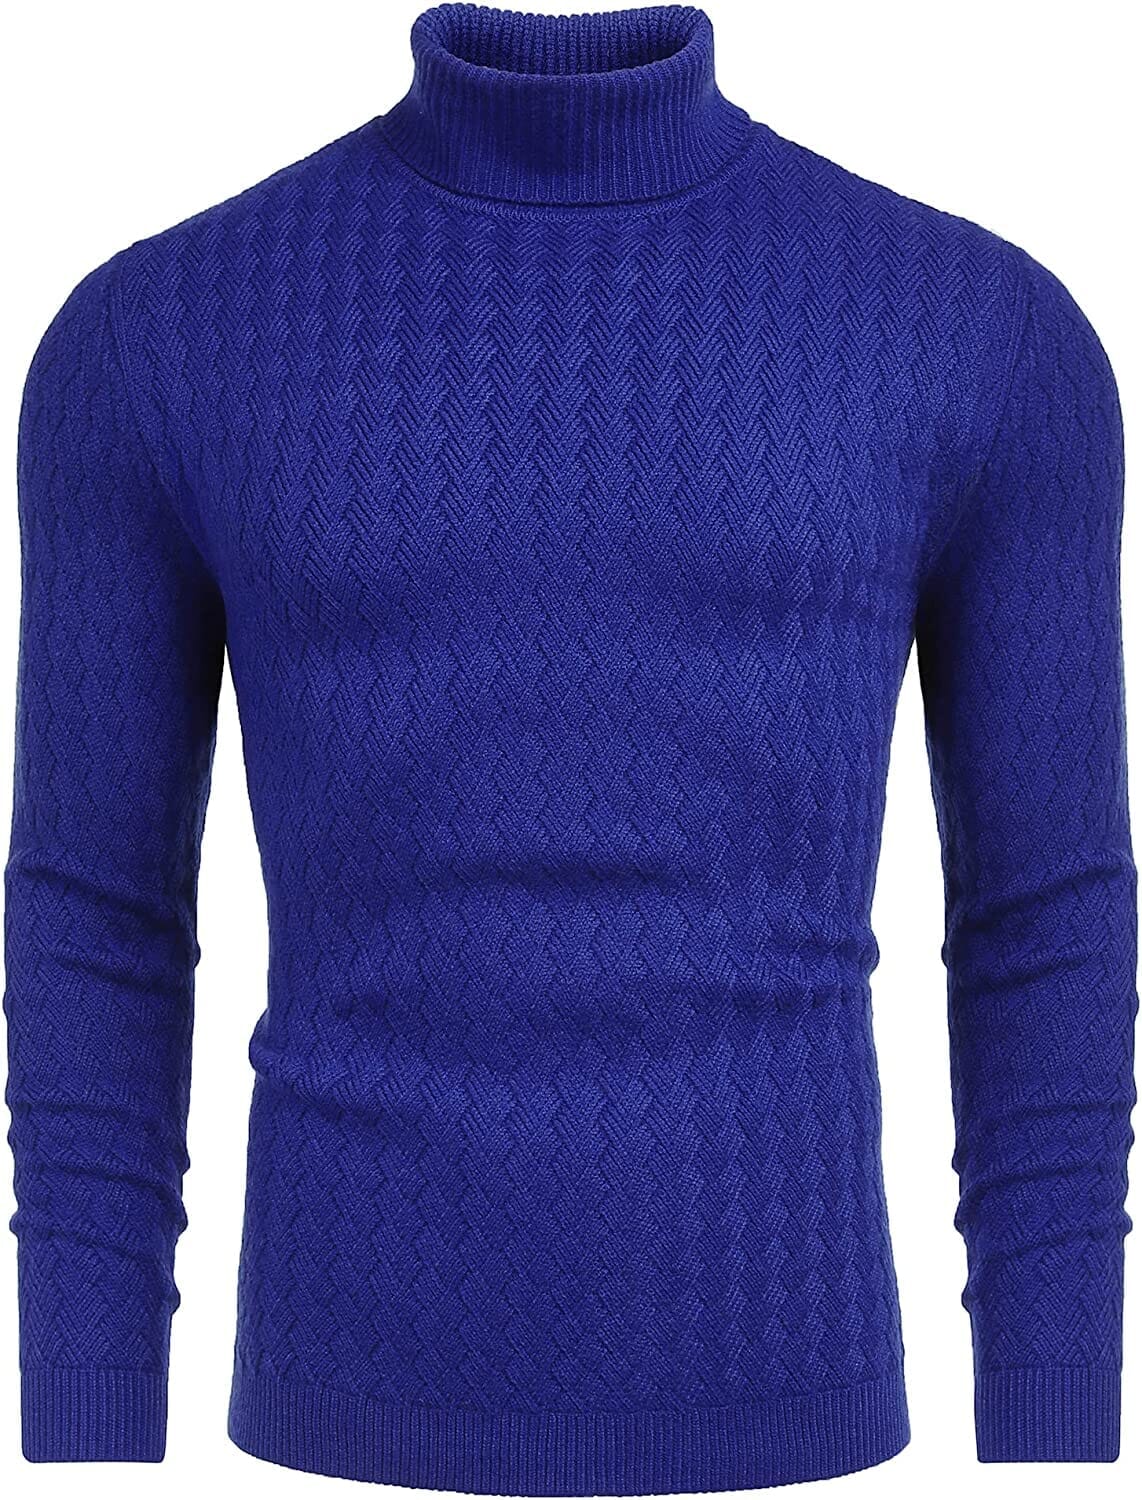 Turtleneck Patterned Knitted Pullover Sweater (US Only) Sweaters COOFANDY Store Blue S 